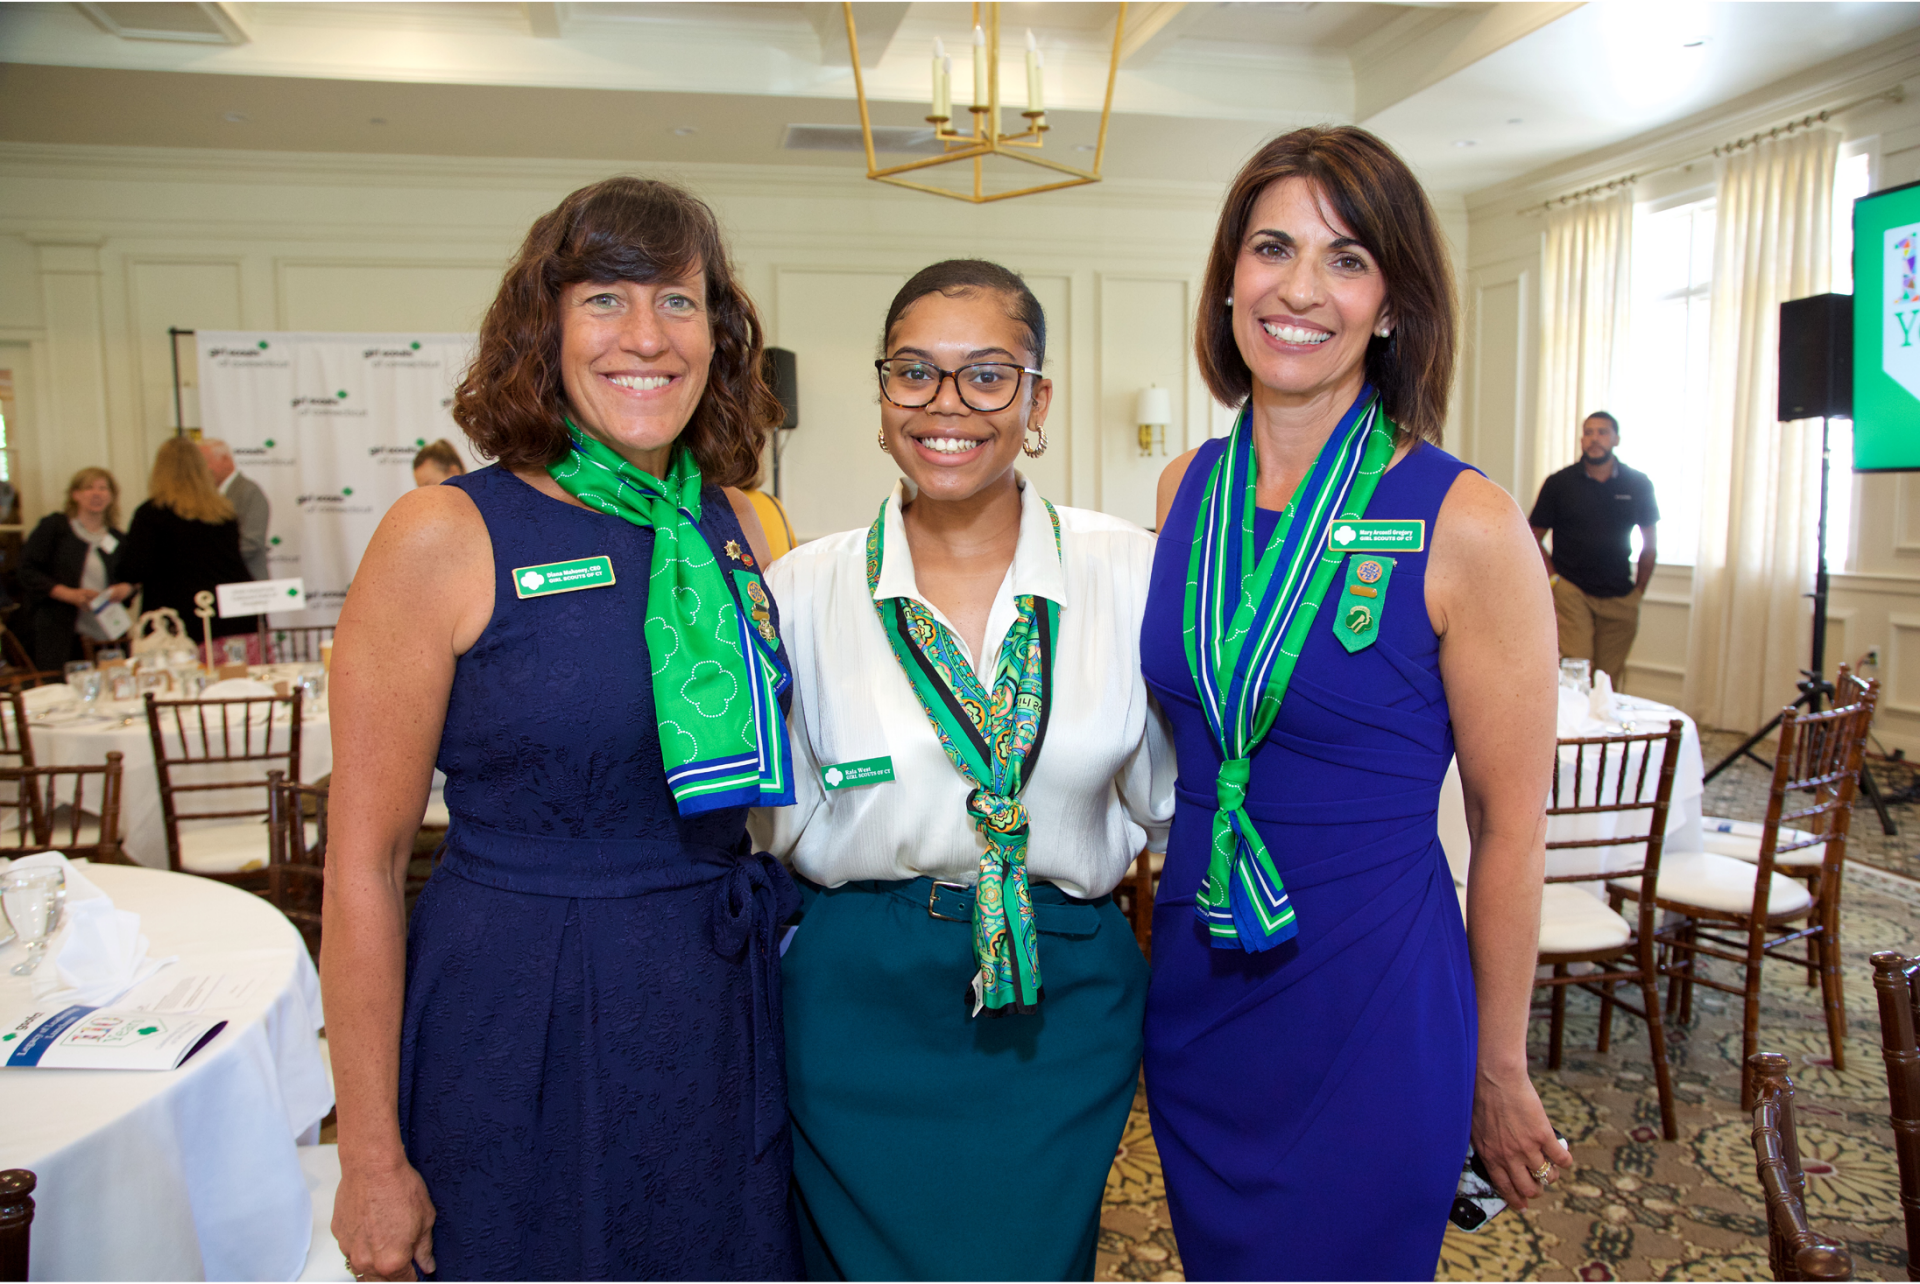 three Girl Scout executives at a banquet standing together smiling